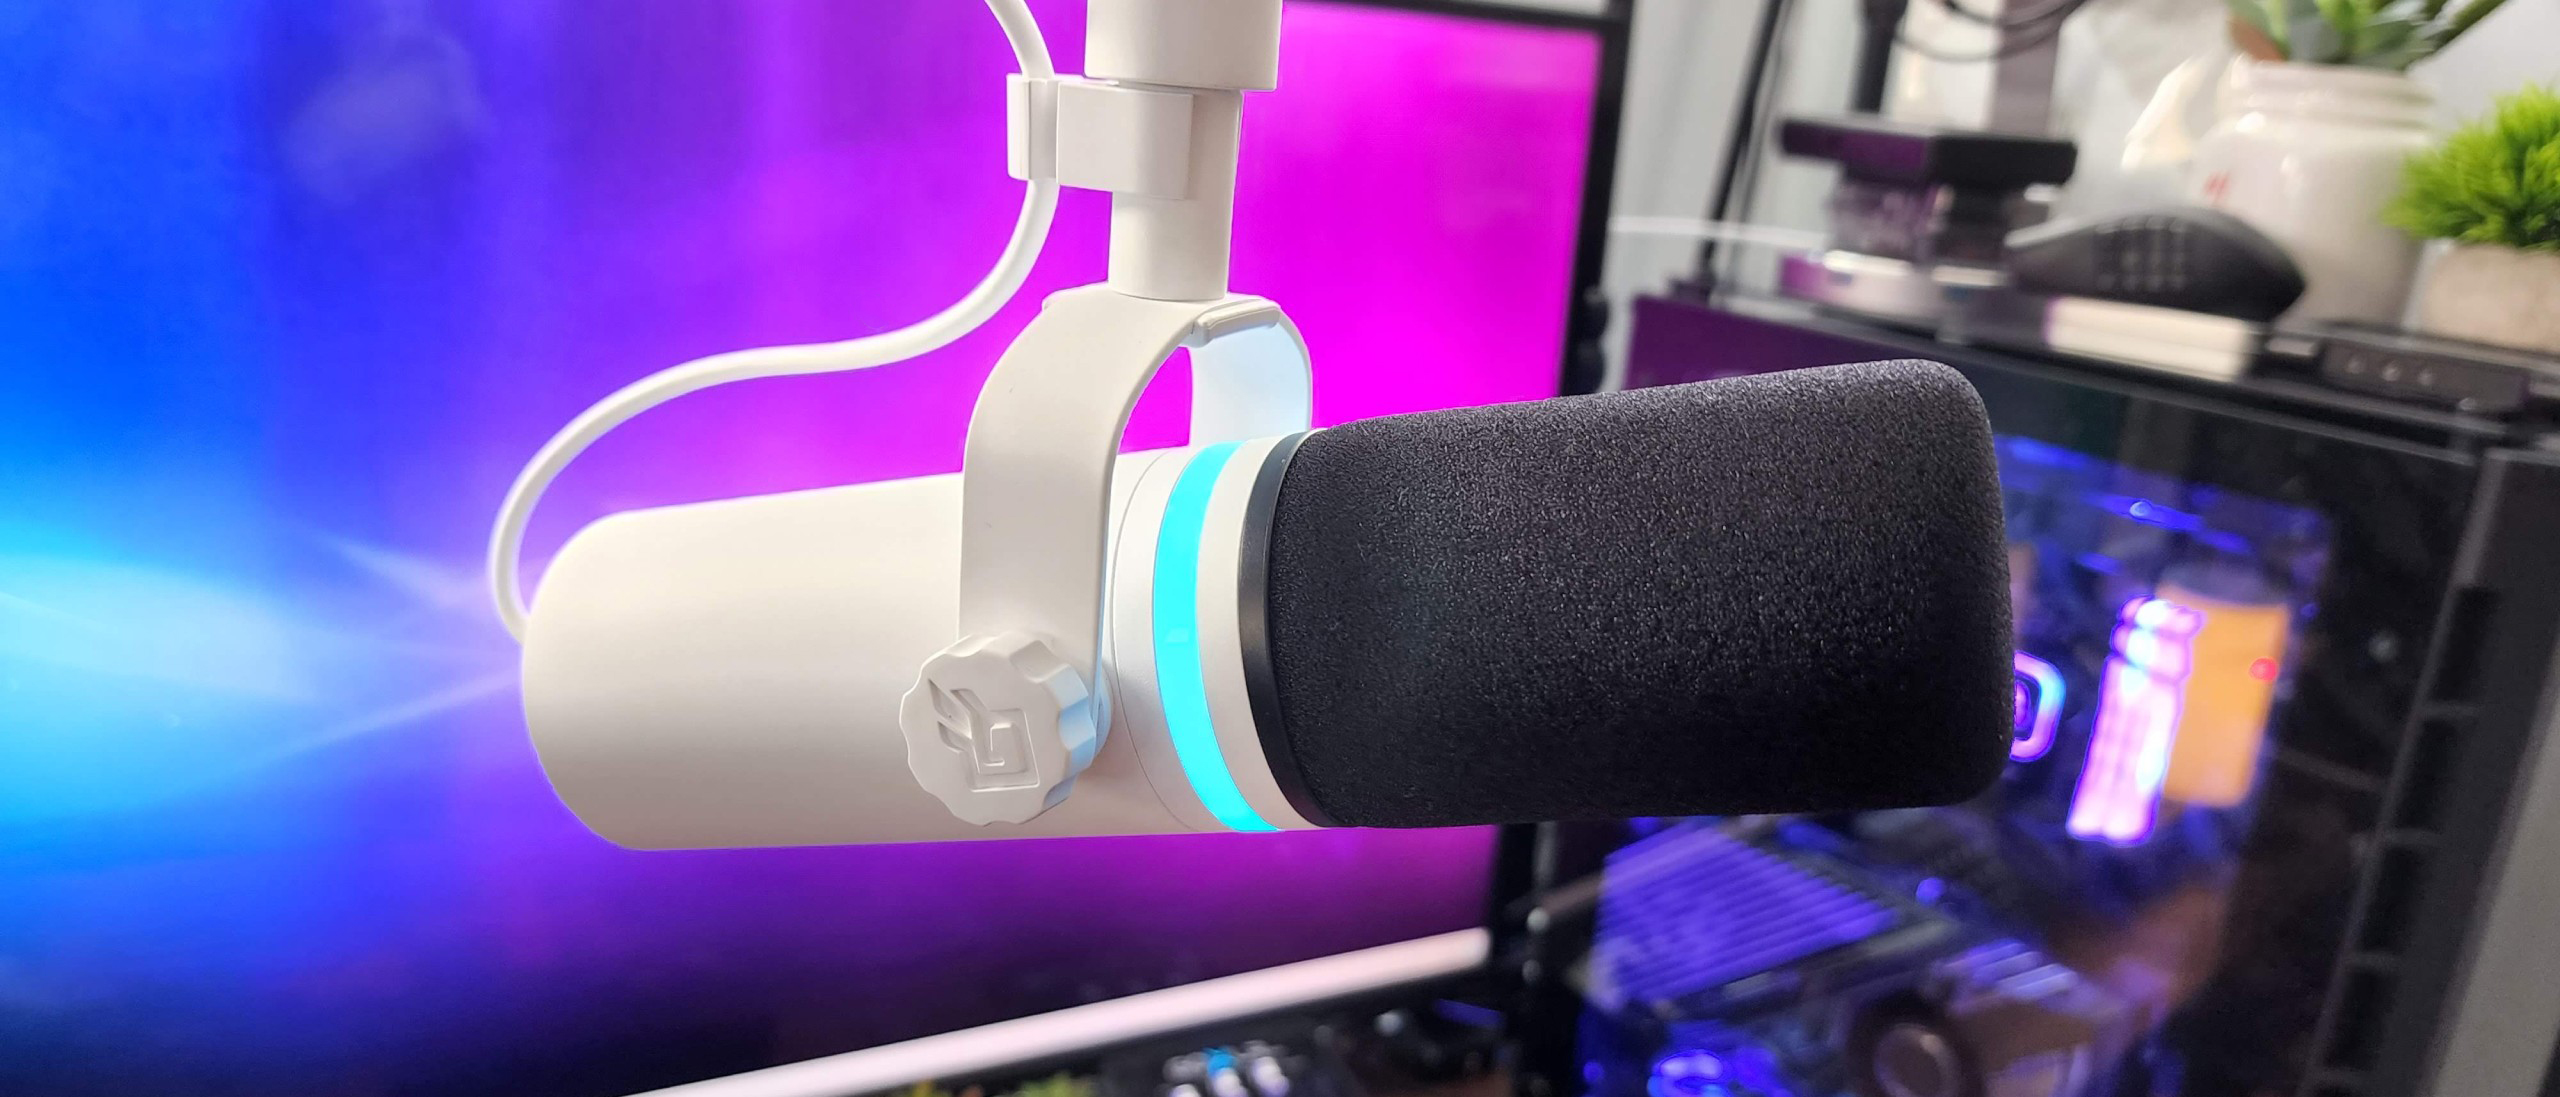 10 Reasons Why You Shouldn't Buy a Blue Yeti and Instead Buy an